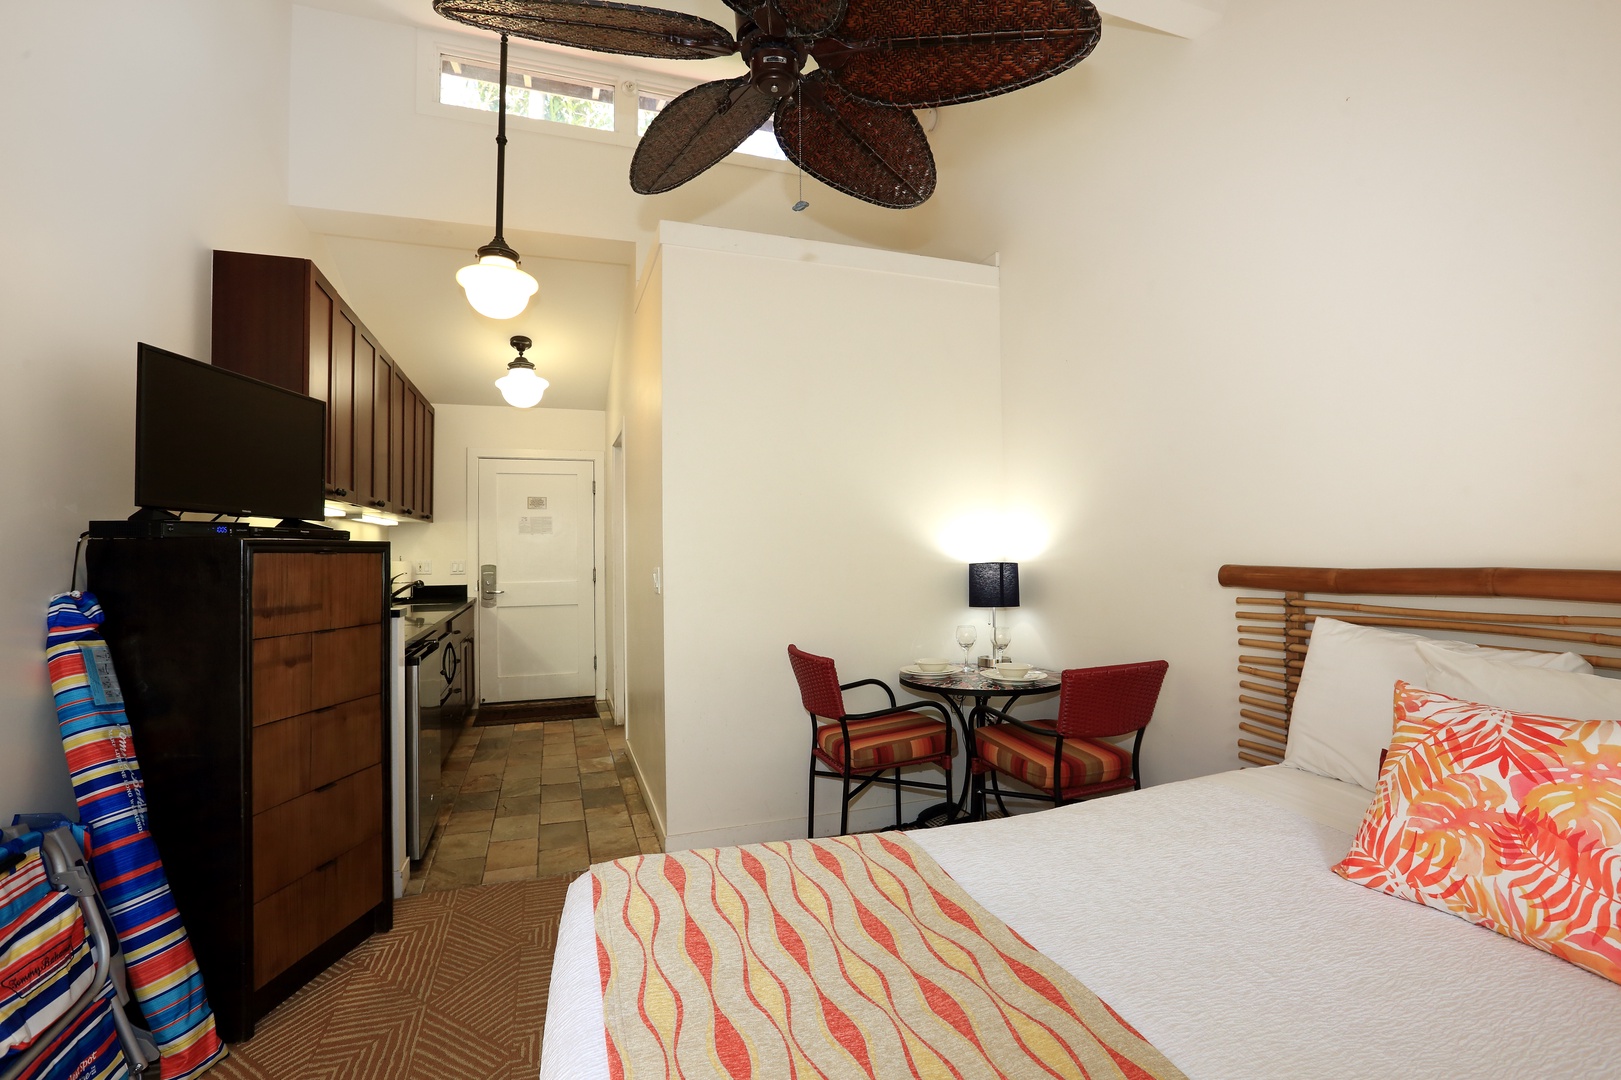 Lahaina Vacation Rentals, Aina Nalu F201: Top Floor, Hawaiian Hideaway in the Heart - High ceilings with natural light at this tropical resort